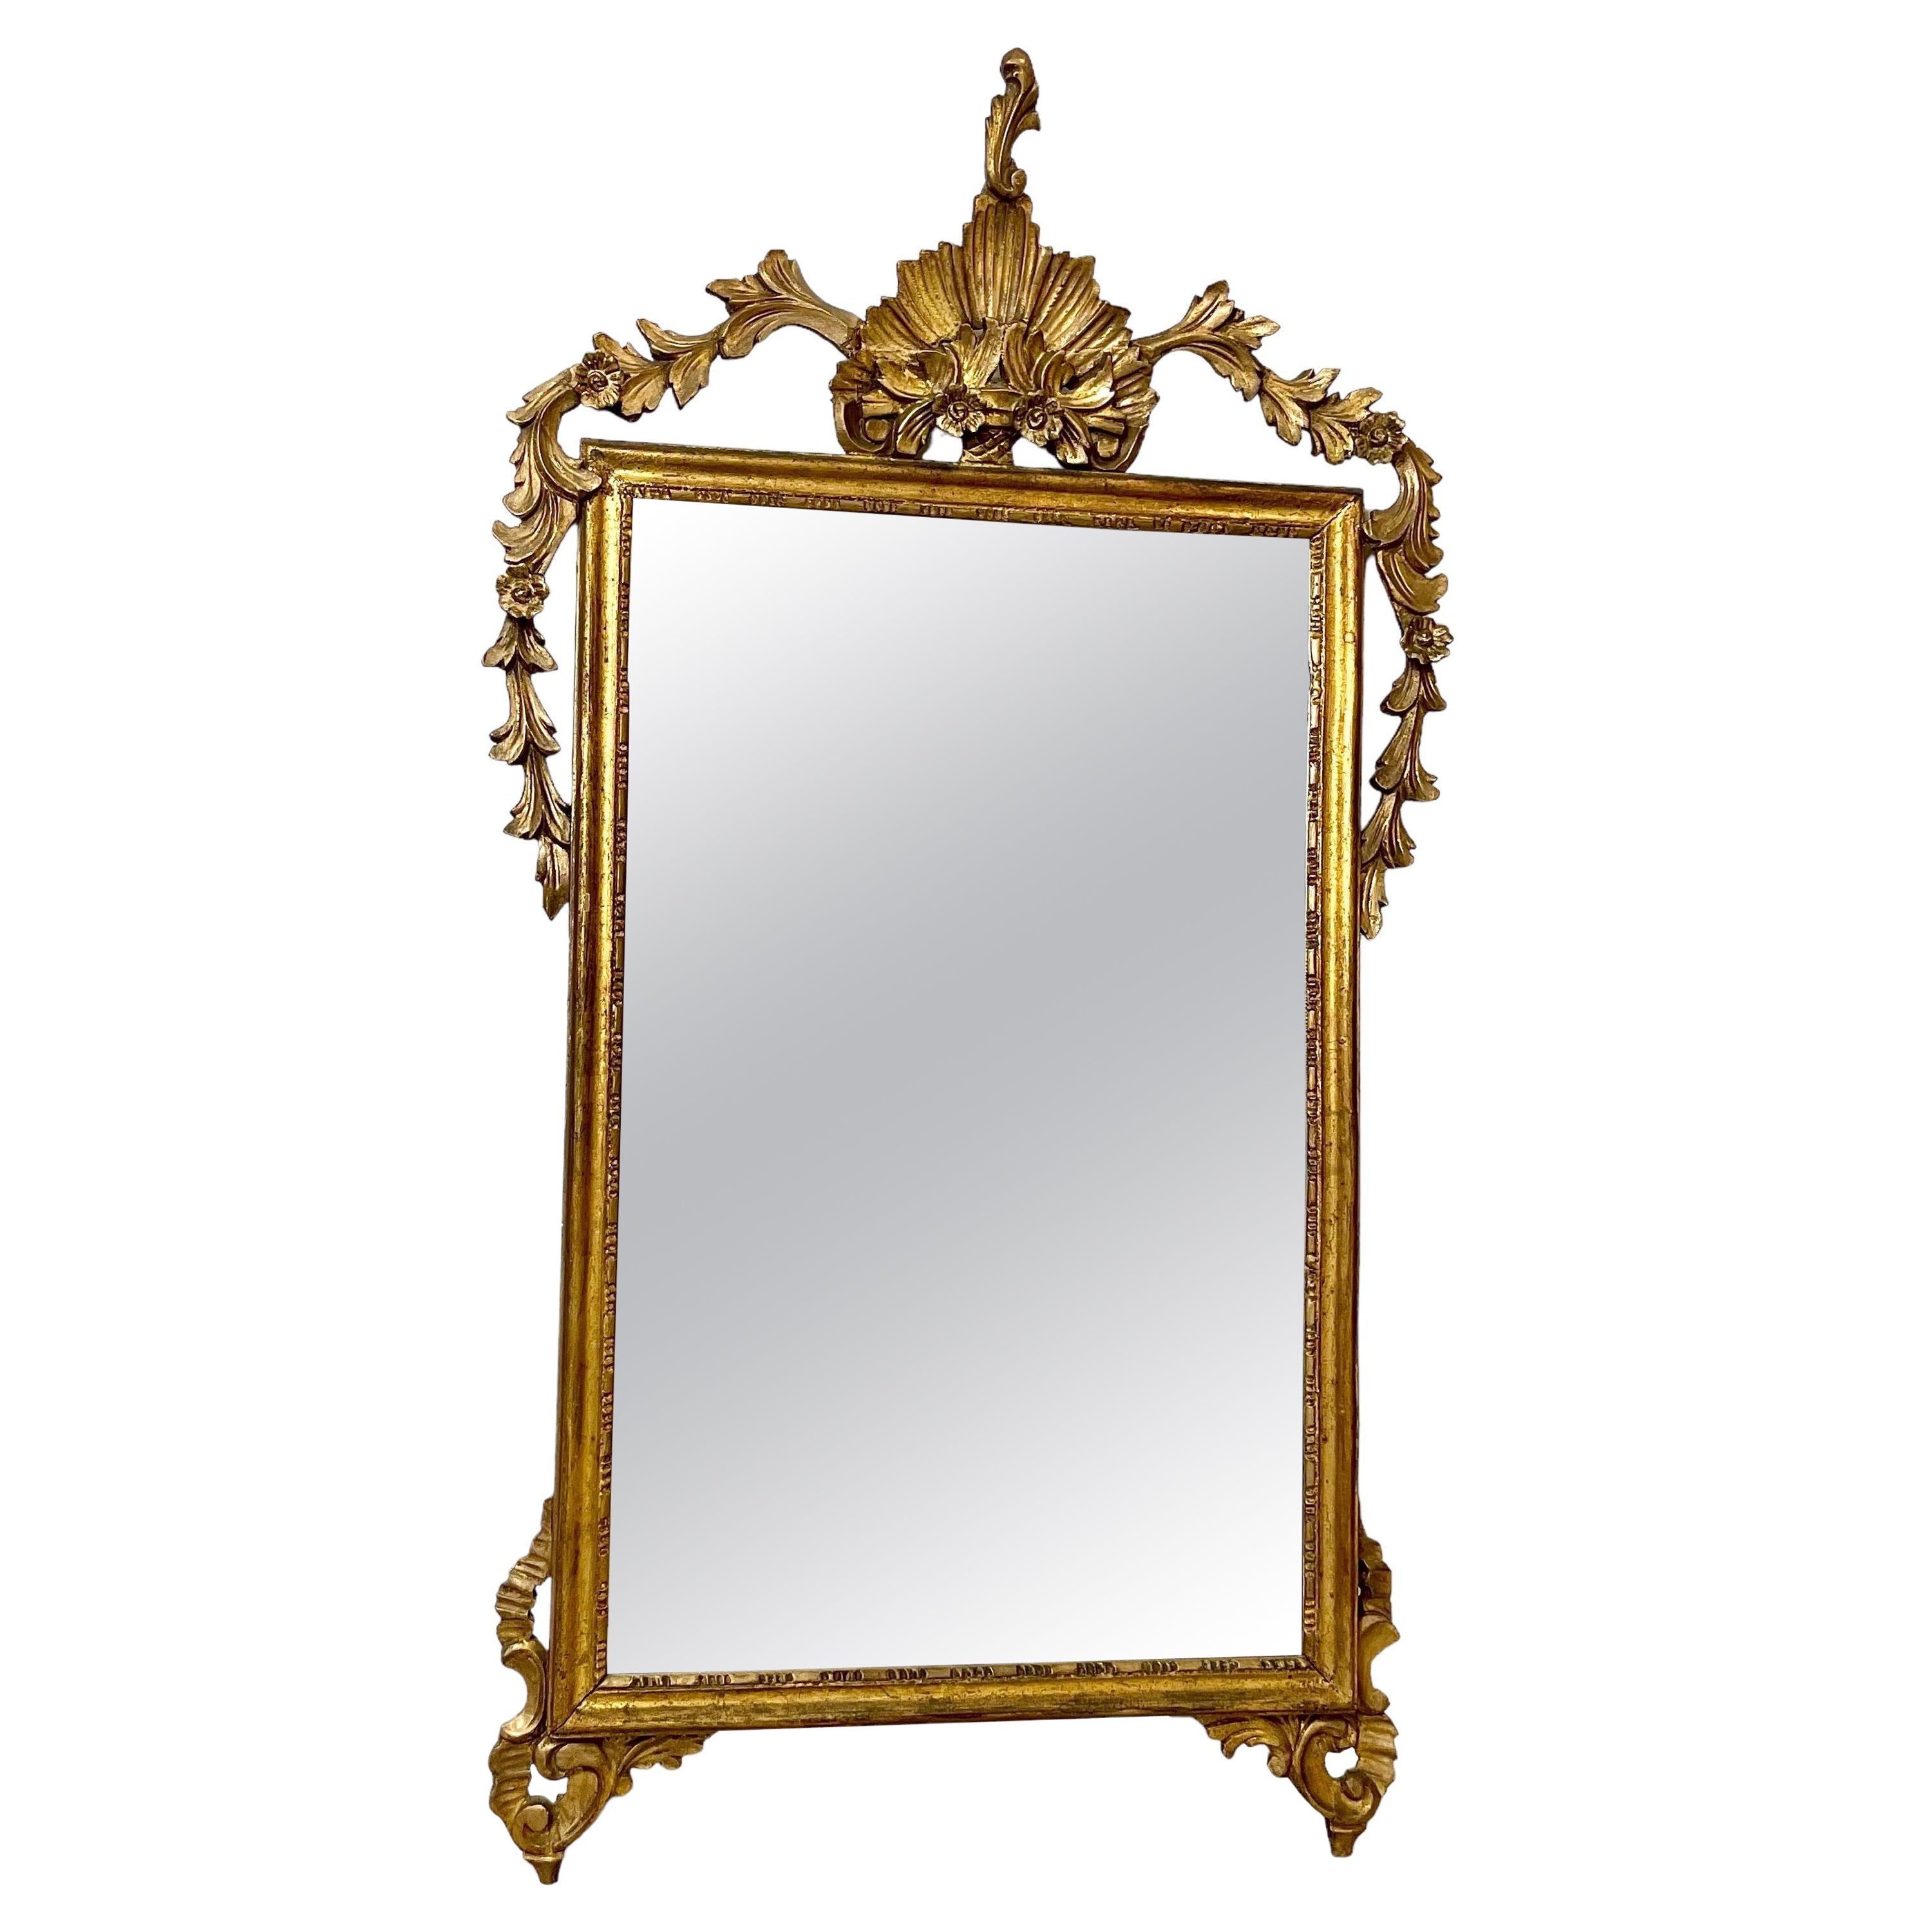 19th Century Giltwood Mantle Mirror with Ornate Crest For Sale